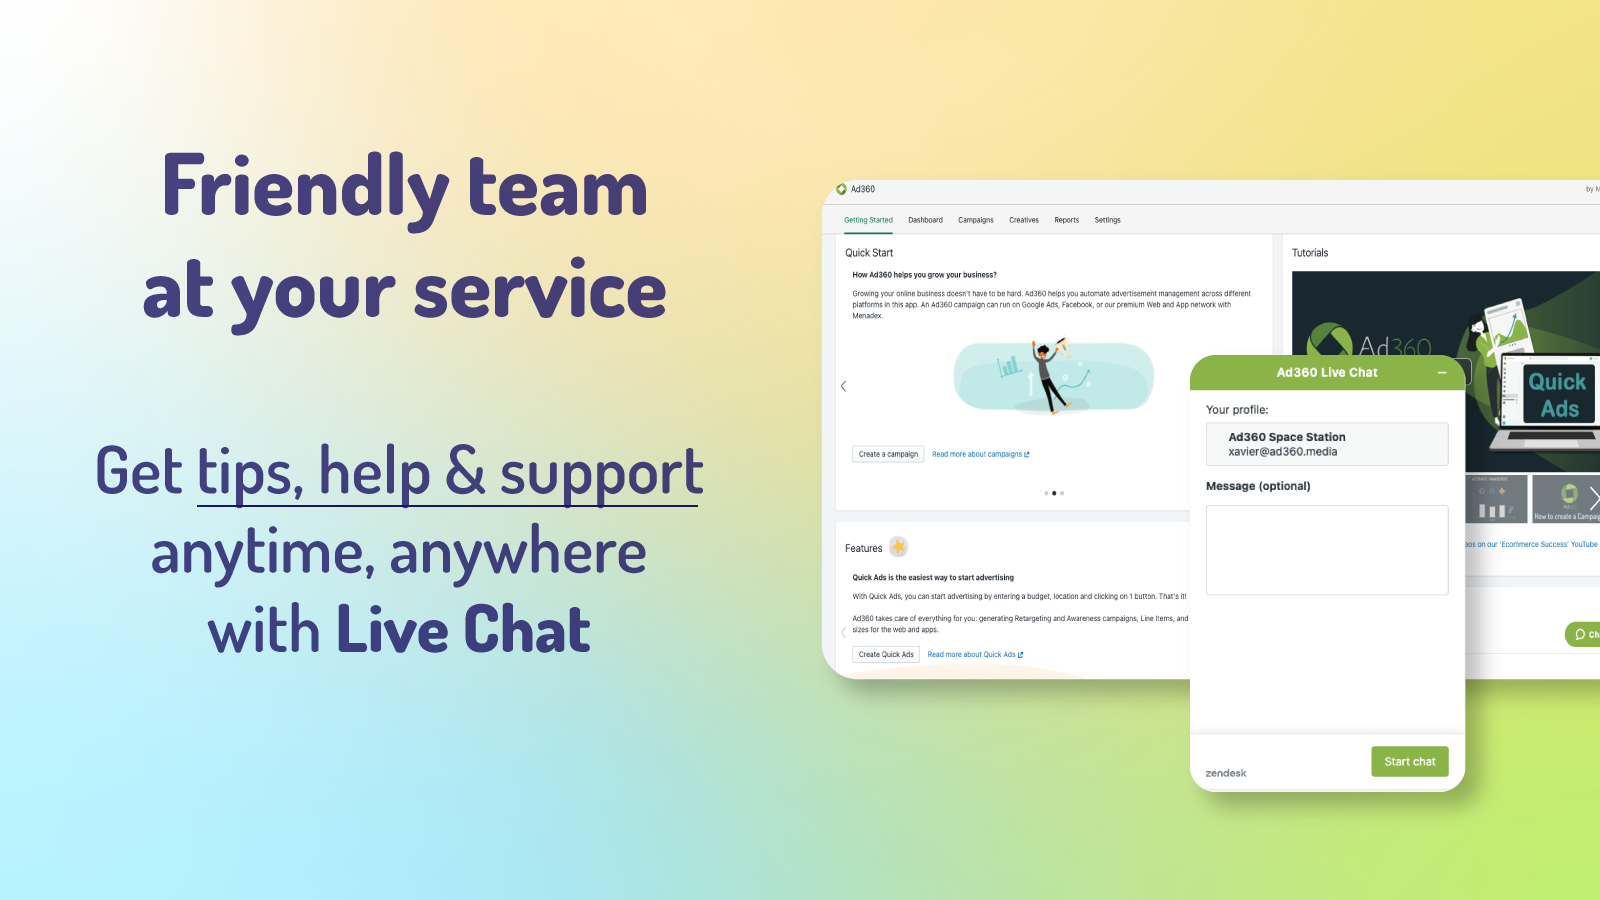 Friendly team at your service: Get tips, help & support anytime